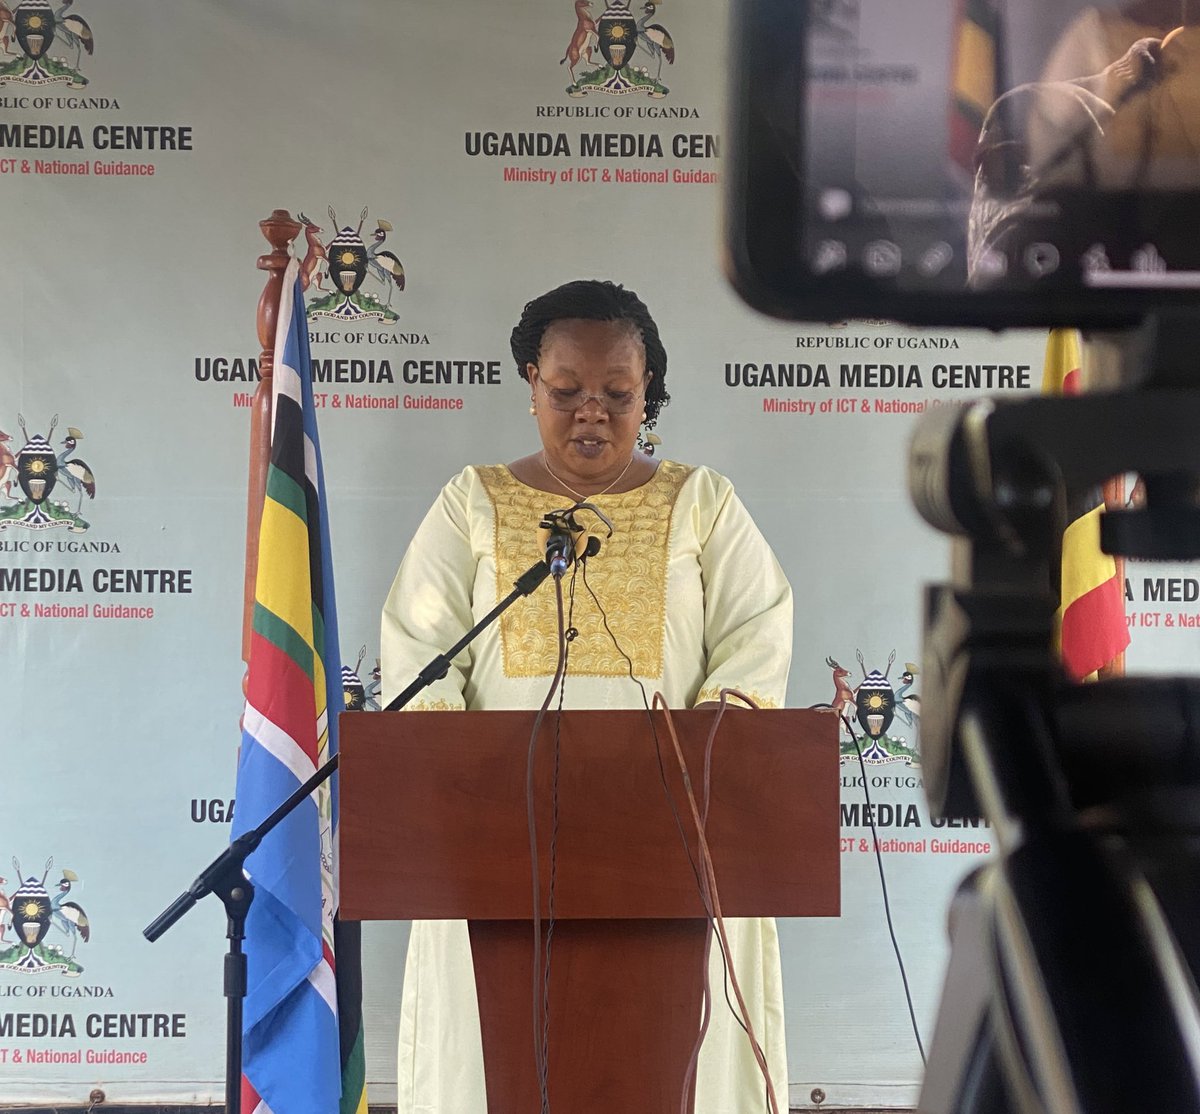 Now @UgandaMediaCent The Minister of State for Youth @Mglsd_UG Hon. Sarah Mateke is addressing a press conference on the upcoming International Youth Day Celebrations. #IYD2023